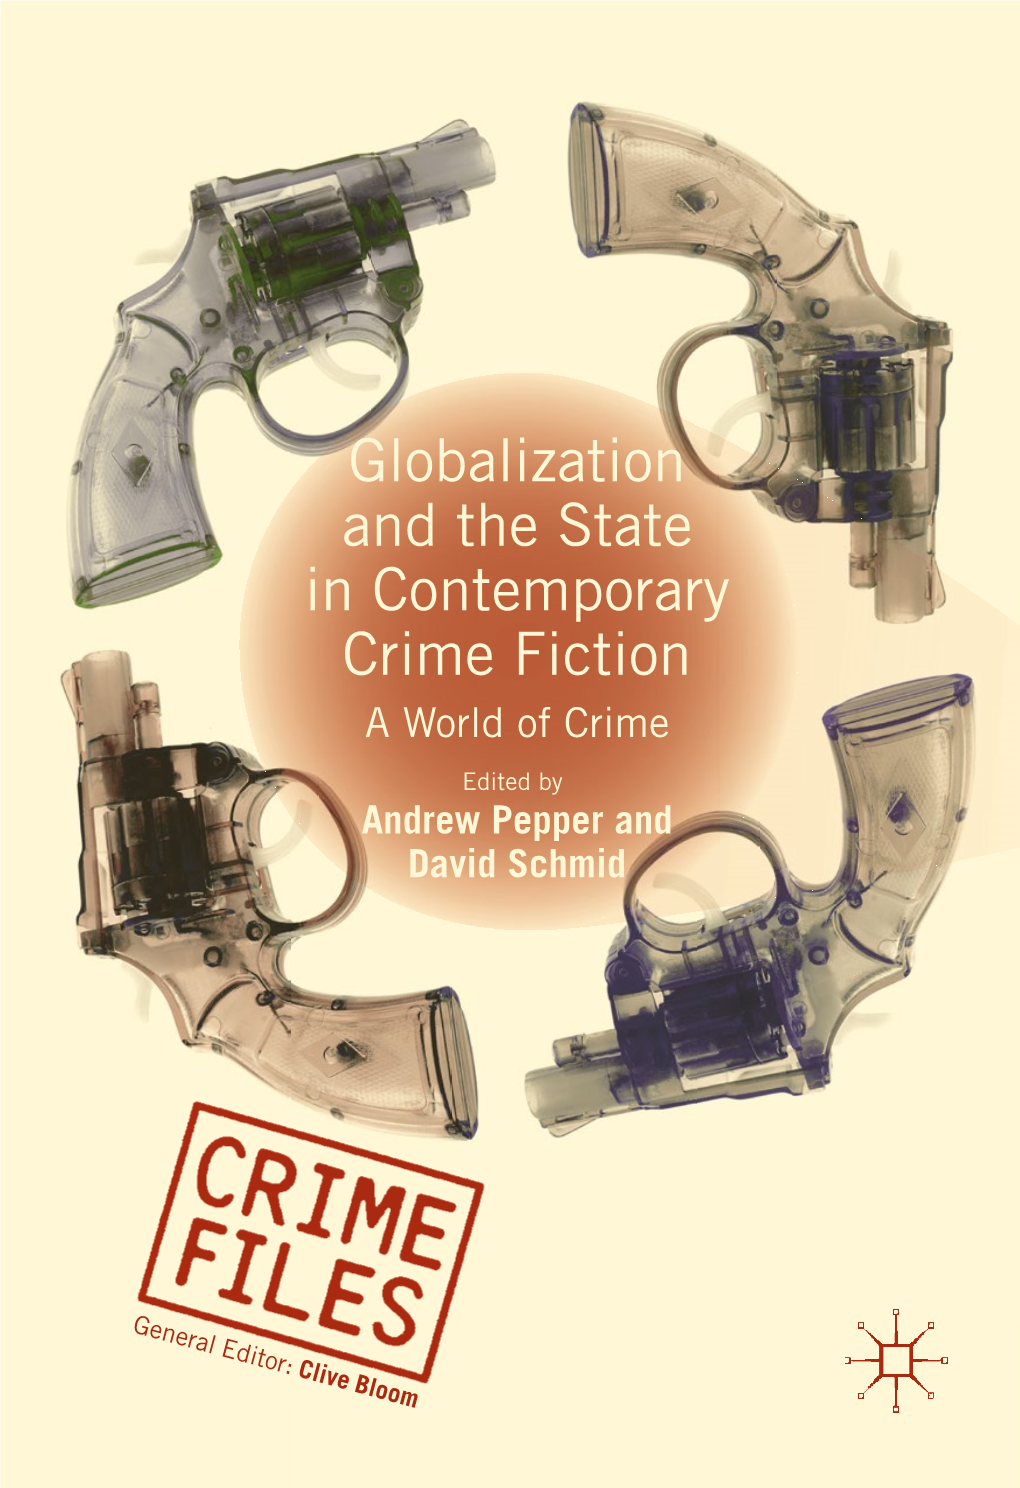 Globalization and the State in Contemporary Crime Fiction a World of Crime